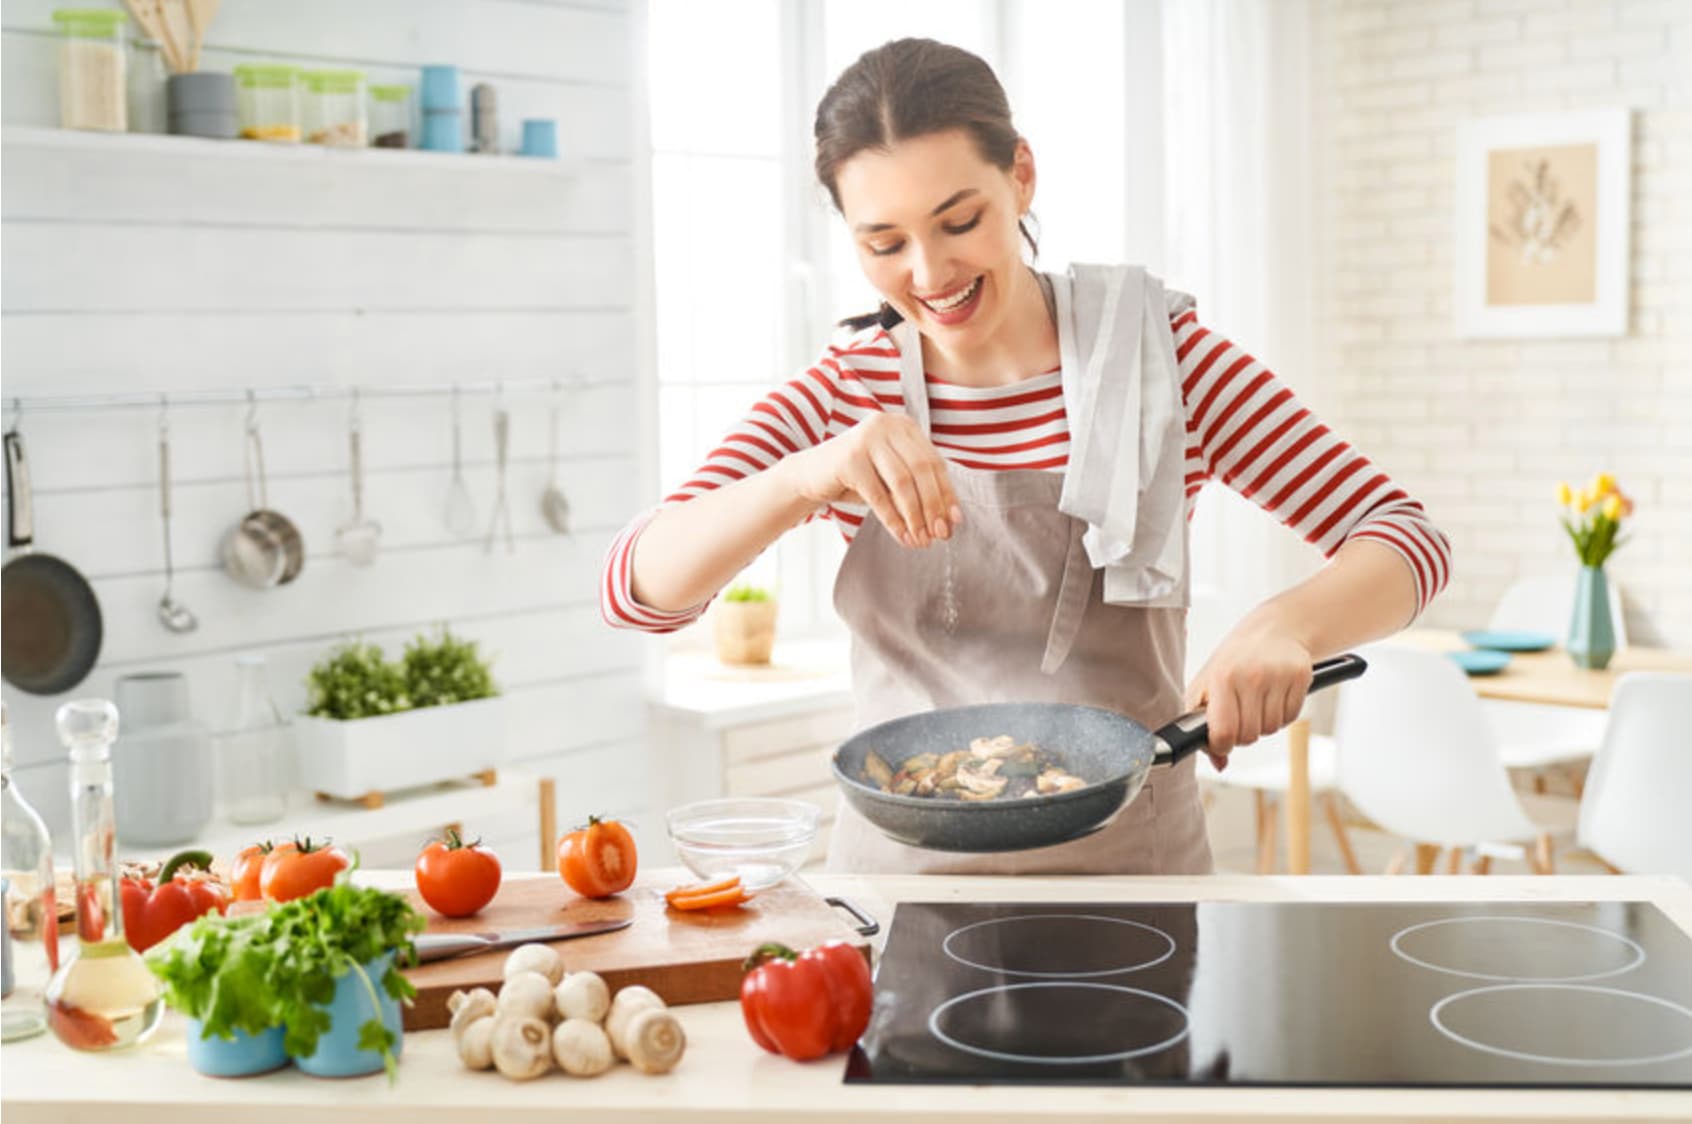 https://www.hollyroser.com/wp-content/uploads/2021/03/is-teflon-safe-the-truth-about-nonstick-cookware-2021-tips-from-holly-roser-fitness.jpg